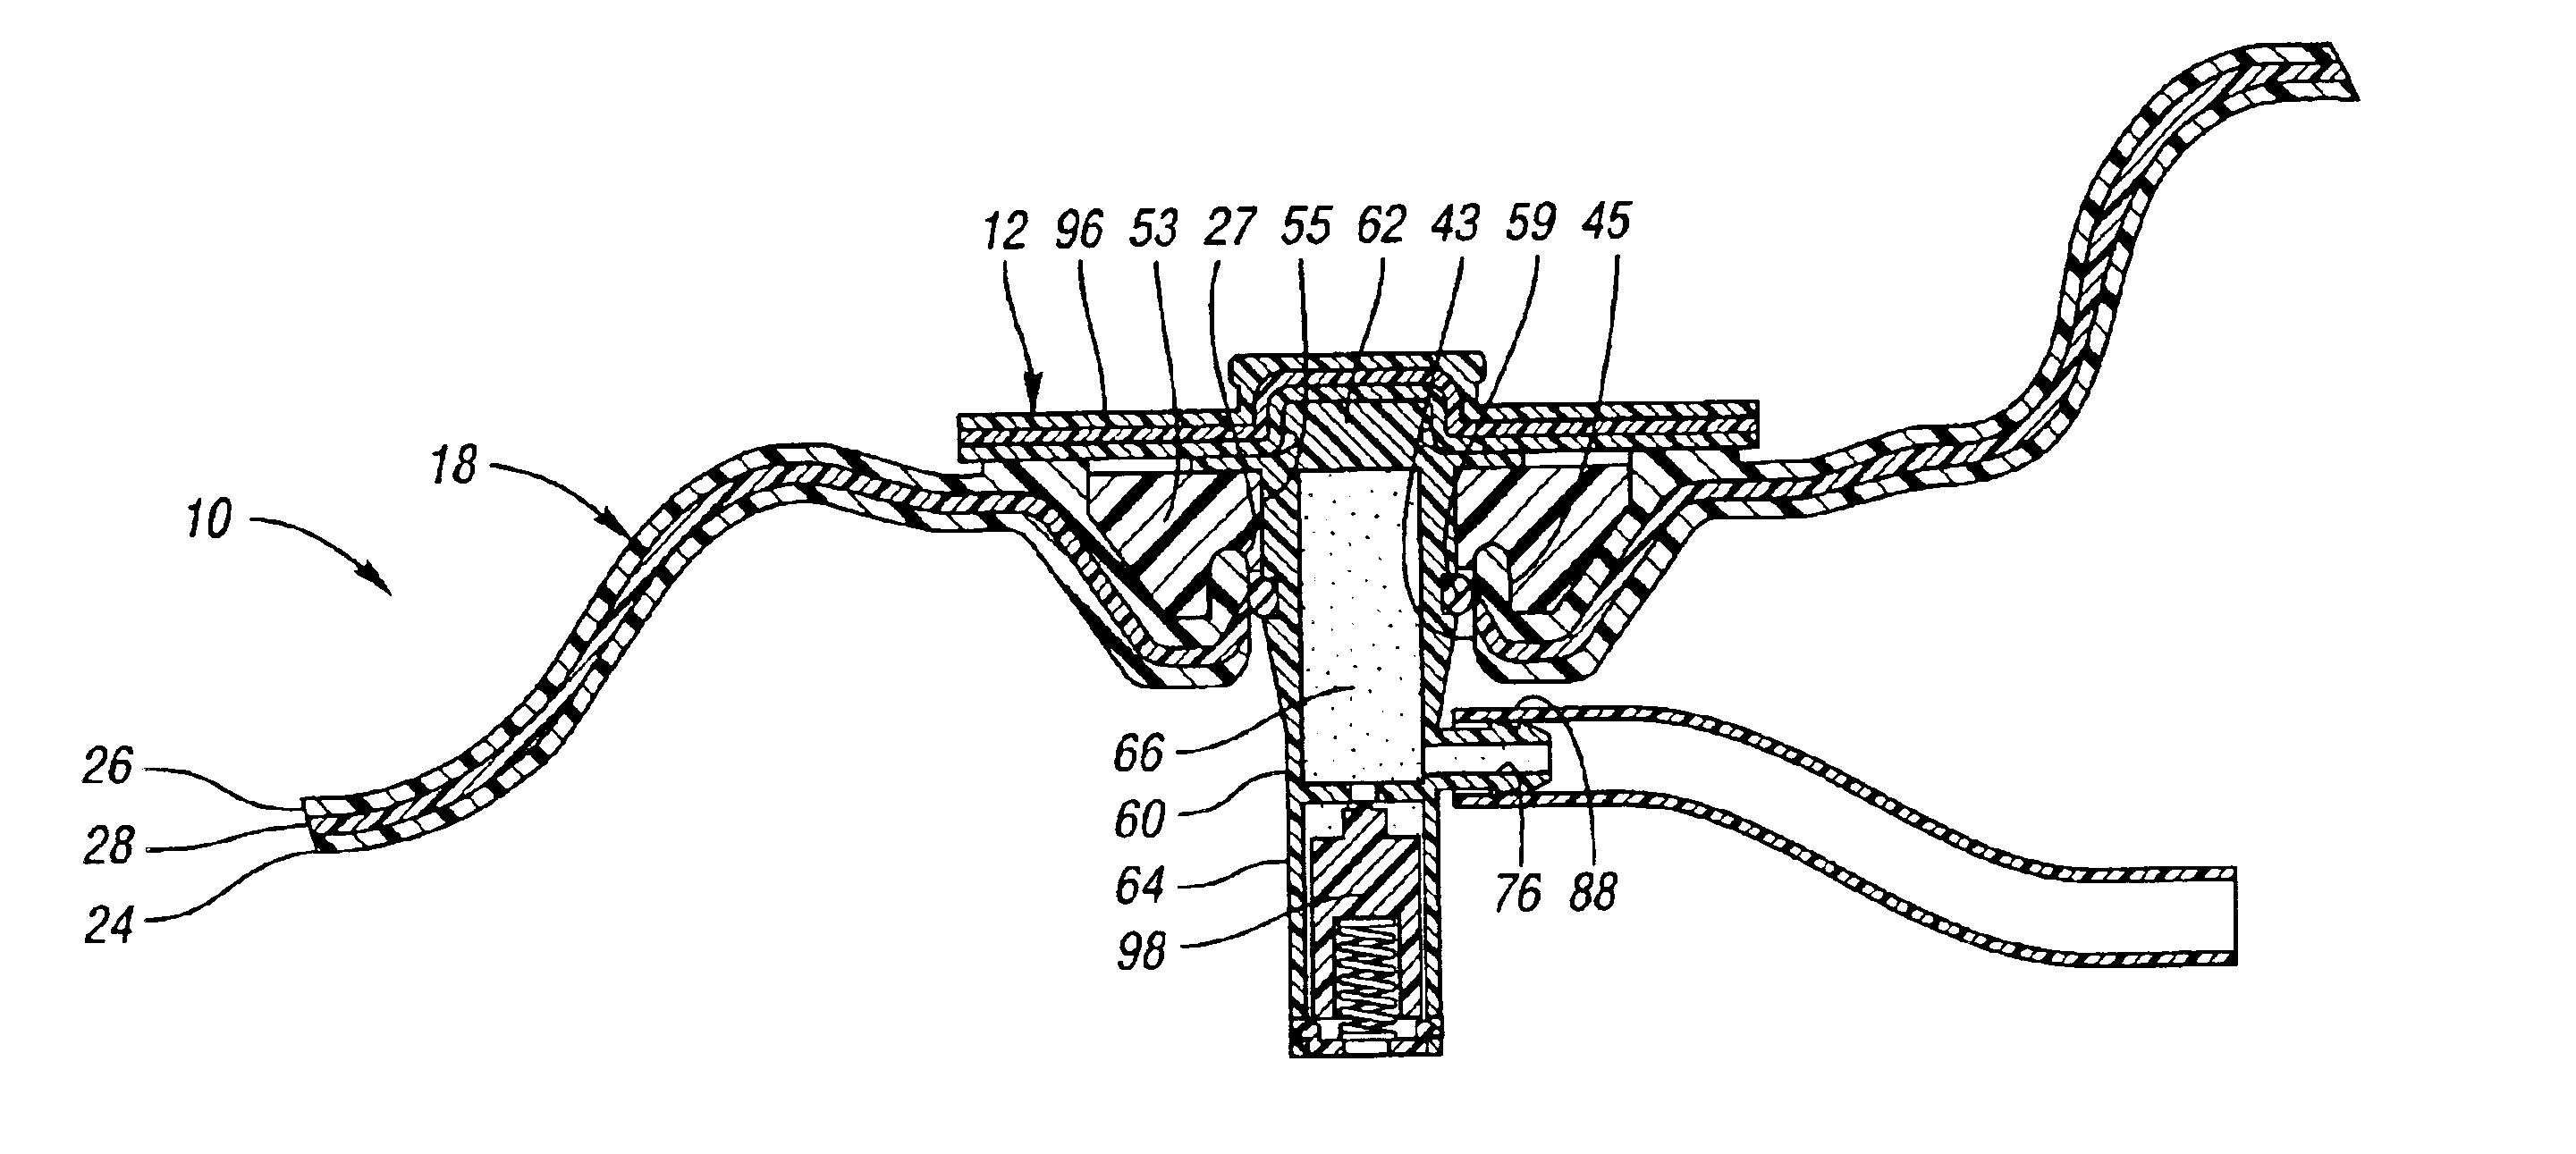 Fuel tank venting system for reduced fuel permeation